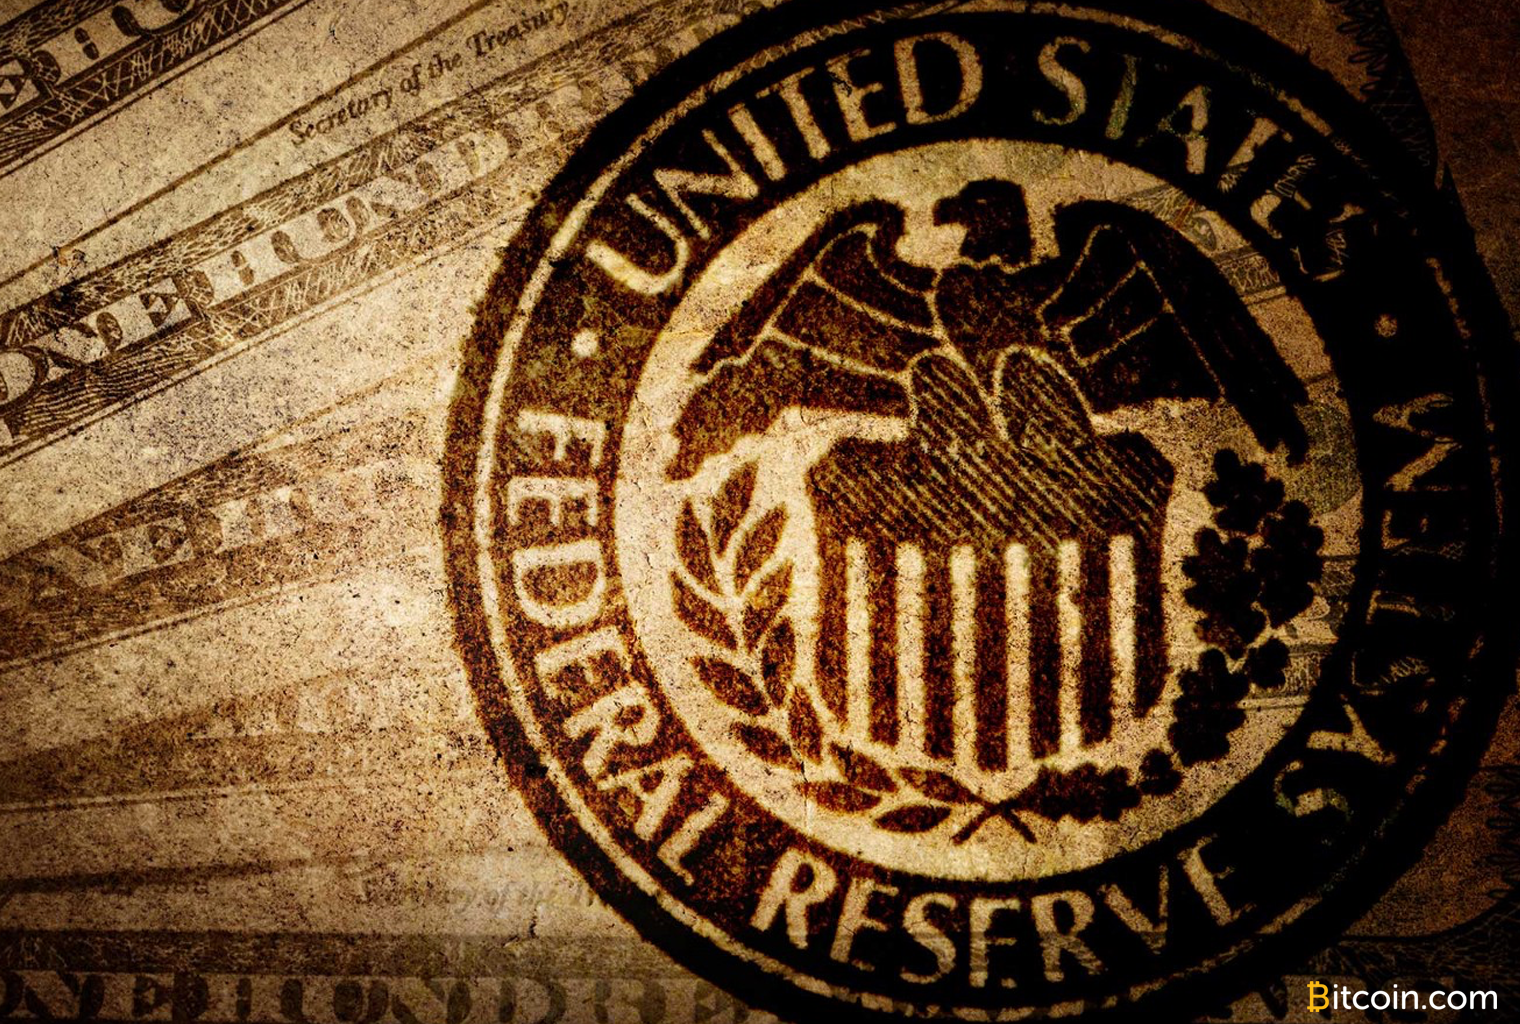 The Fed's Low Interest Rates and QE Bolstered a Dependent Generation